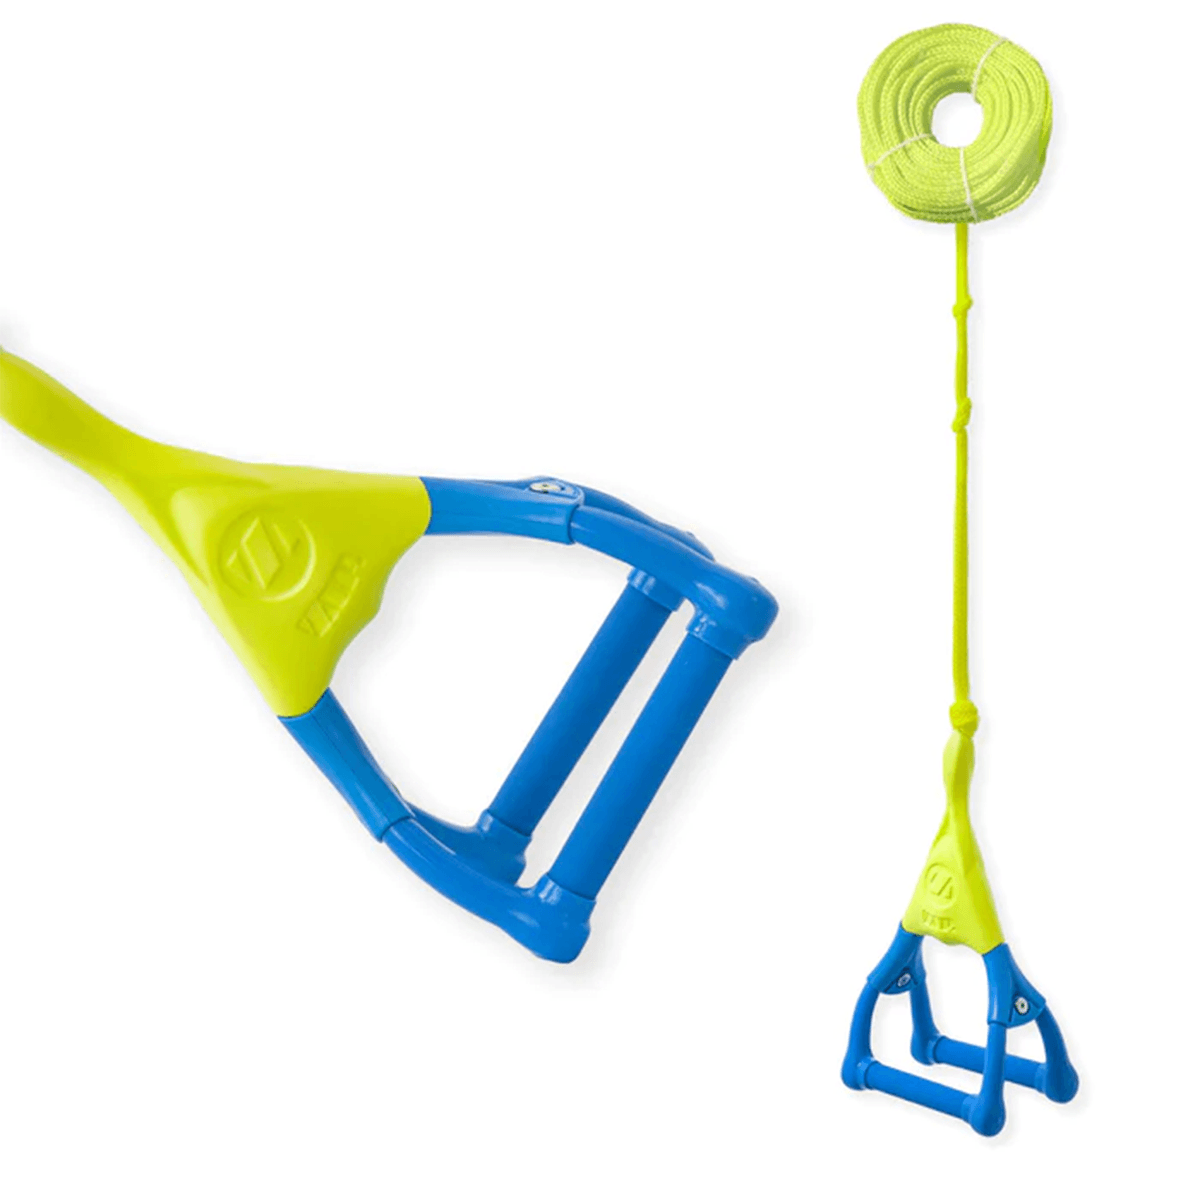 ZUP DoubleZUP Tow Handle & Rope 1.5 Yellow/Blue - BoardCo